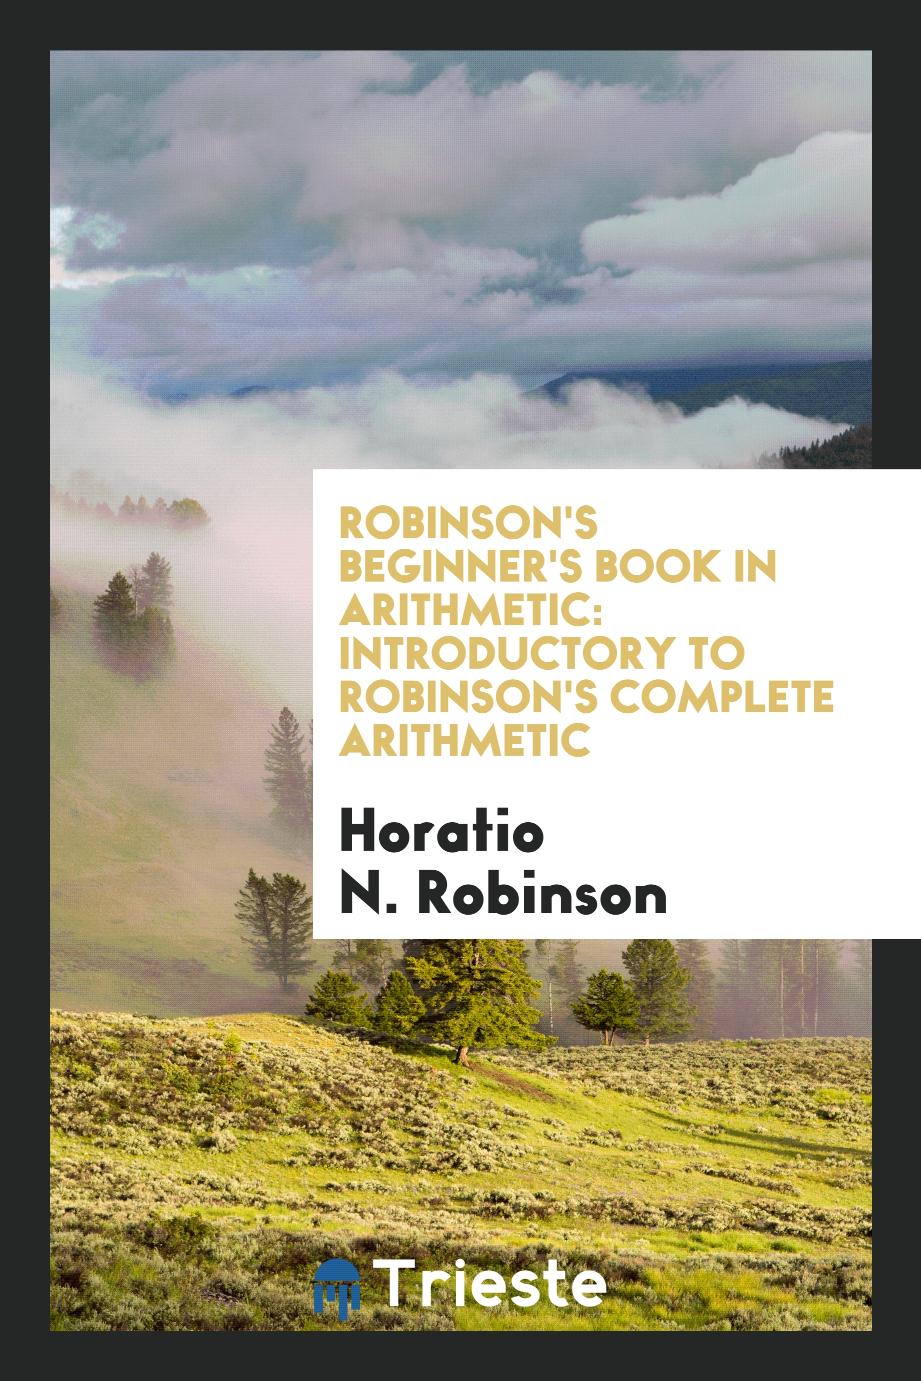 Robinson's beginner's book in arithmetic: introductory to Robinson's complete arithmetic